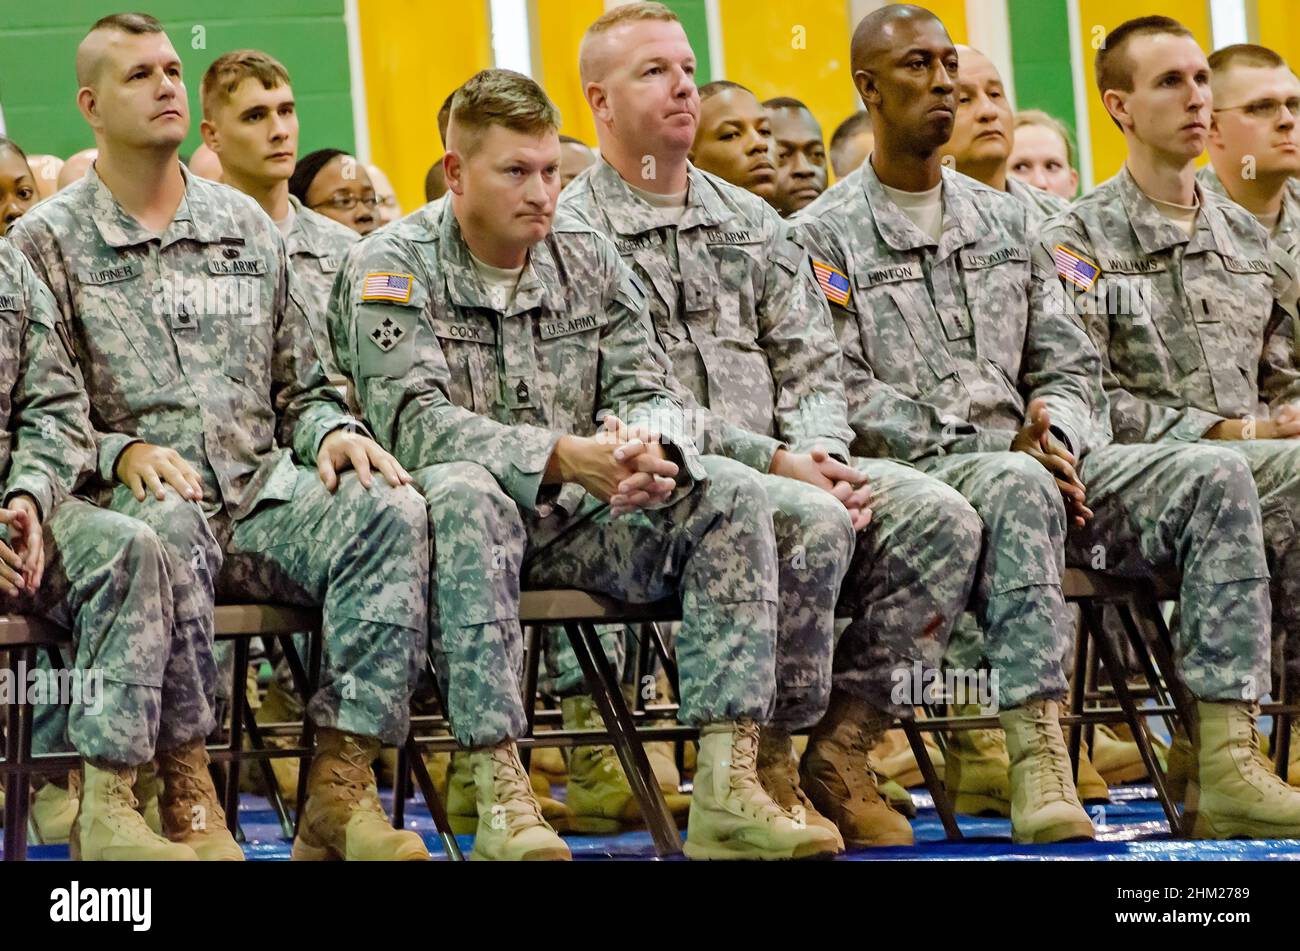 Members of the U.S. Army National Guard 223rd Engineer Battalion attend a send-off ceremony, Oct. 1, 2011, in West Point, Mississippi. Stock Photo